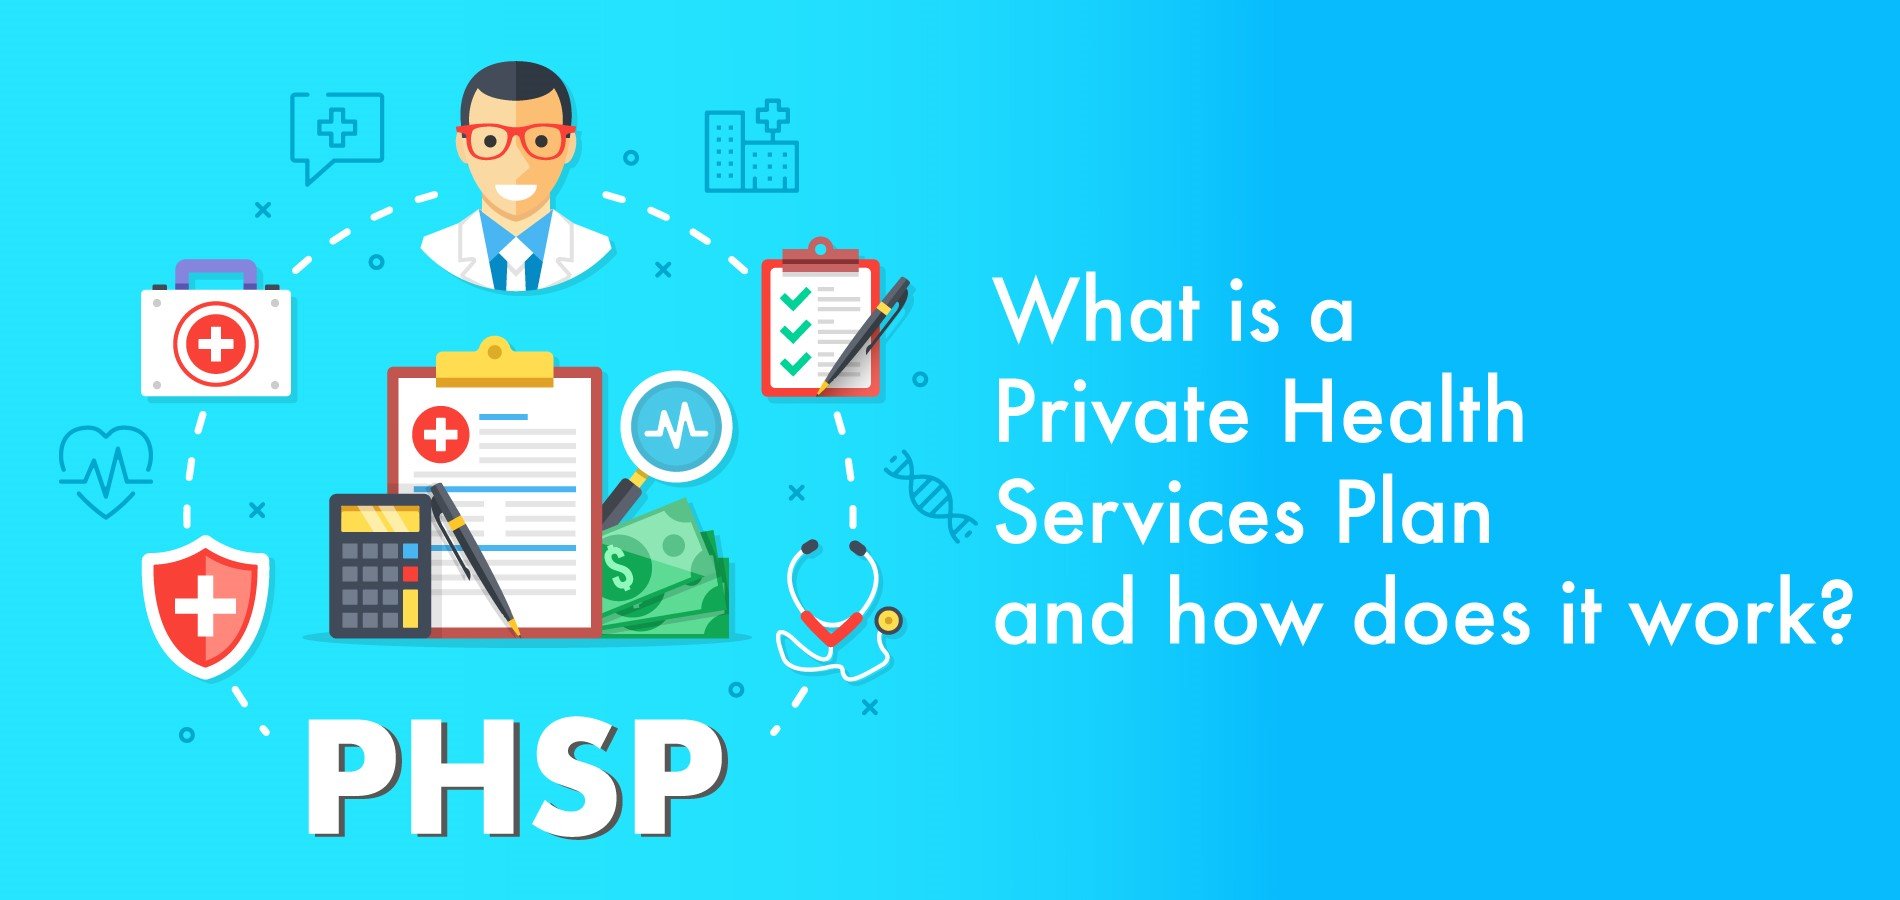 What is a Private Health Services Plan and how does it work